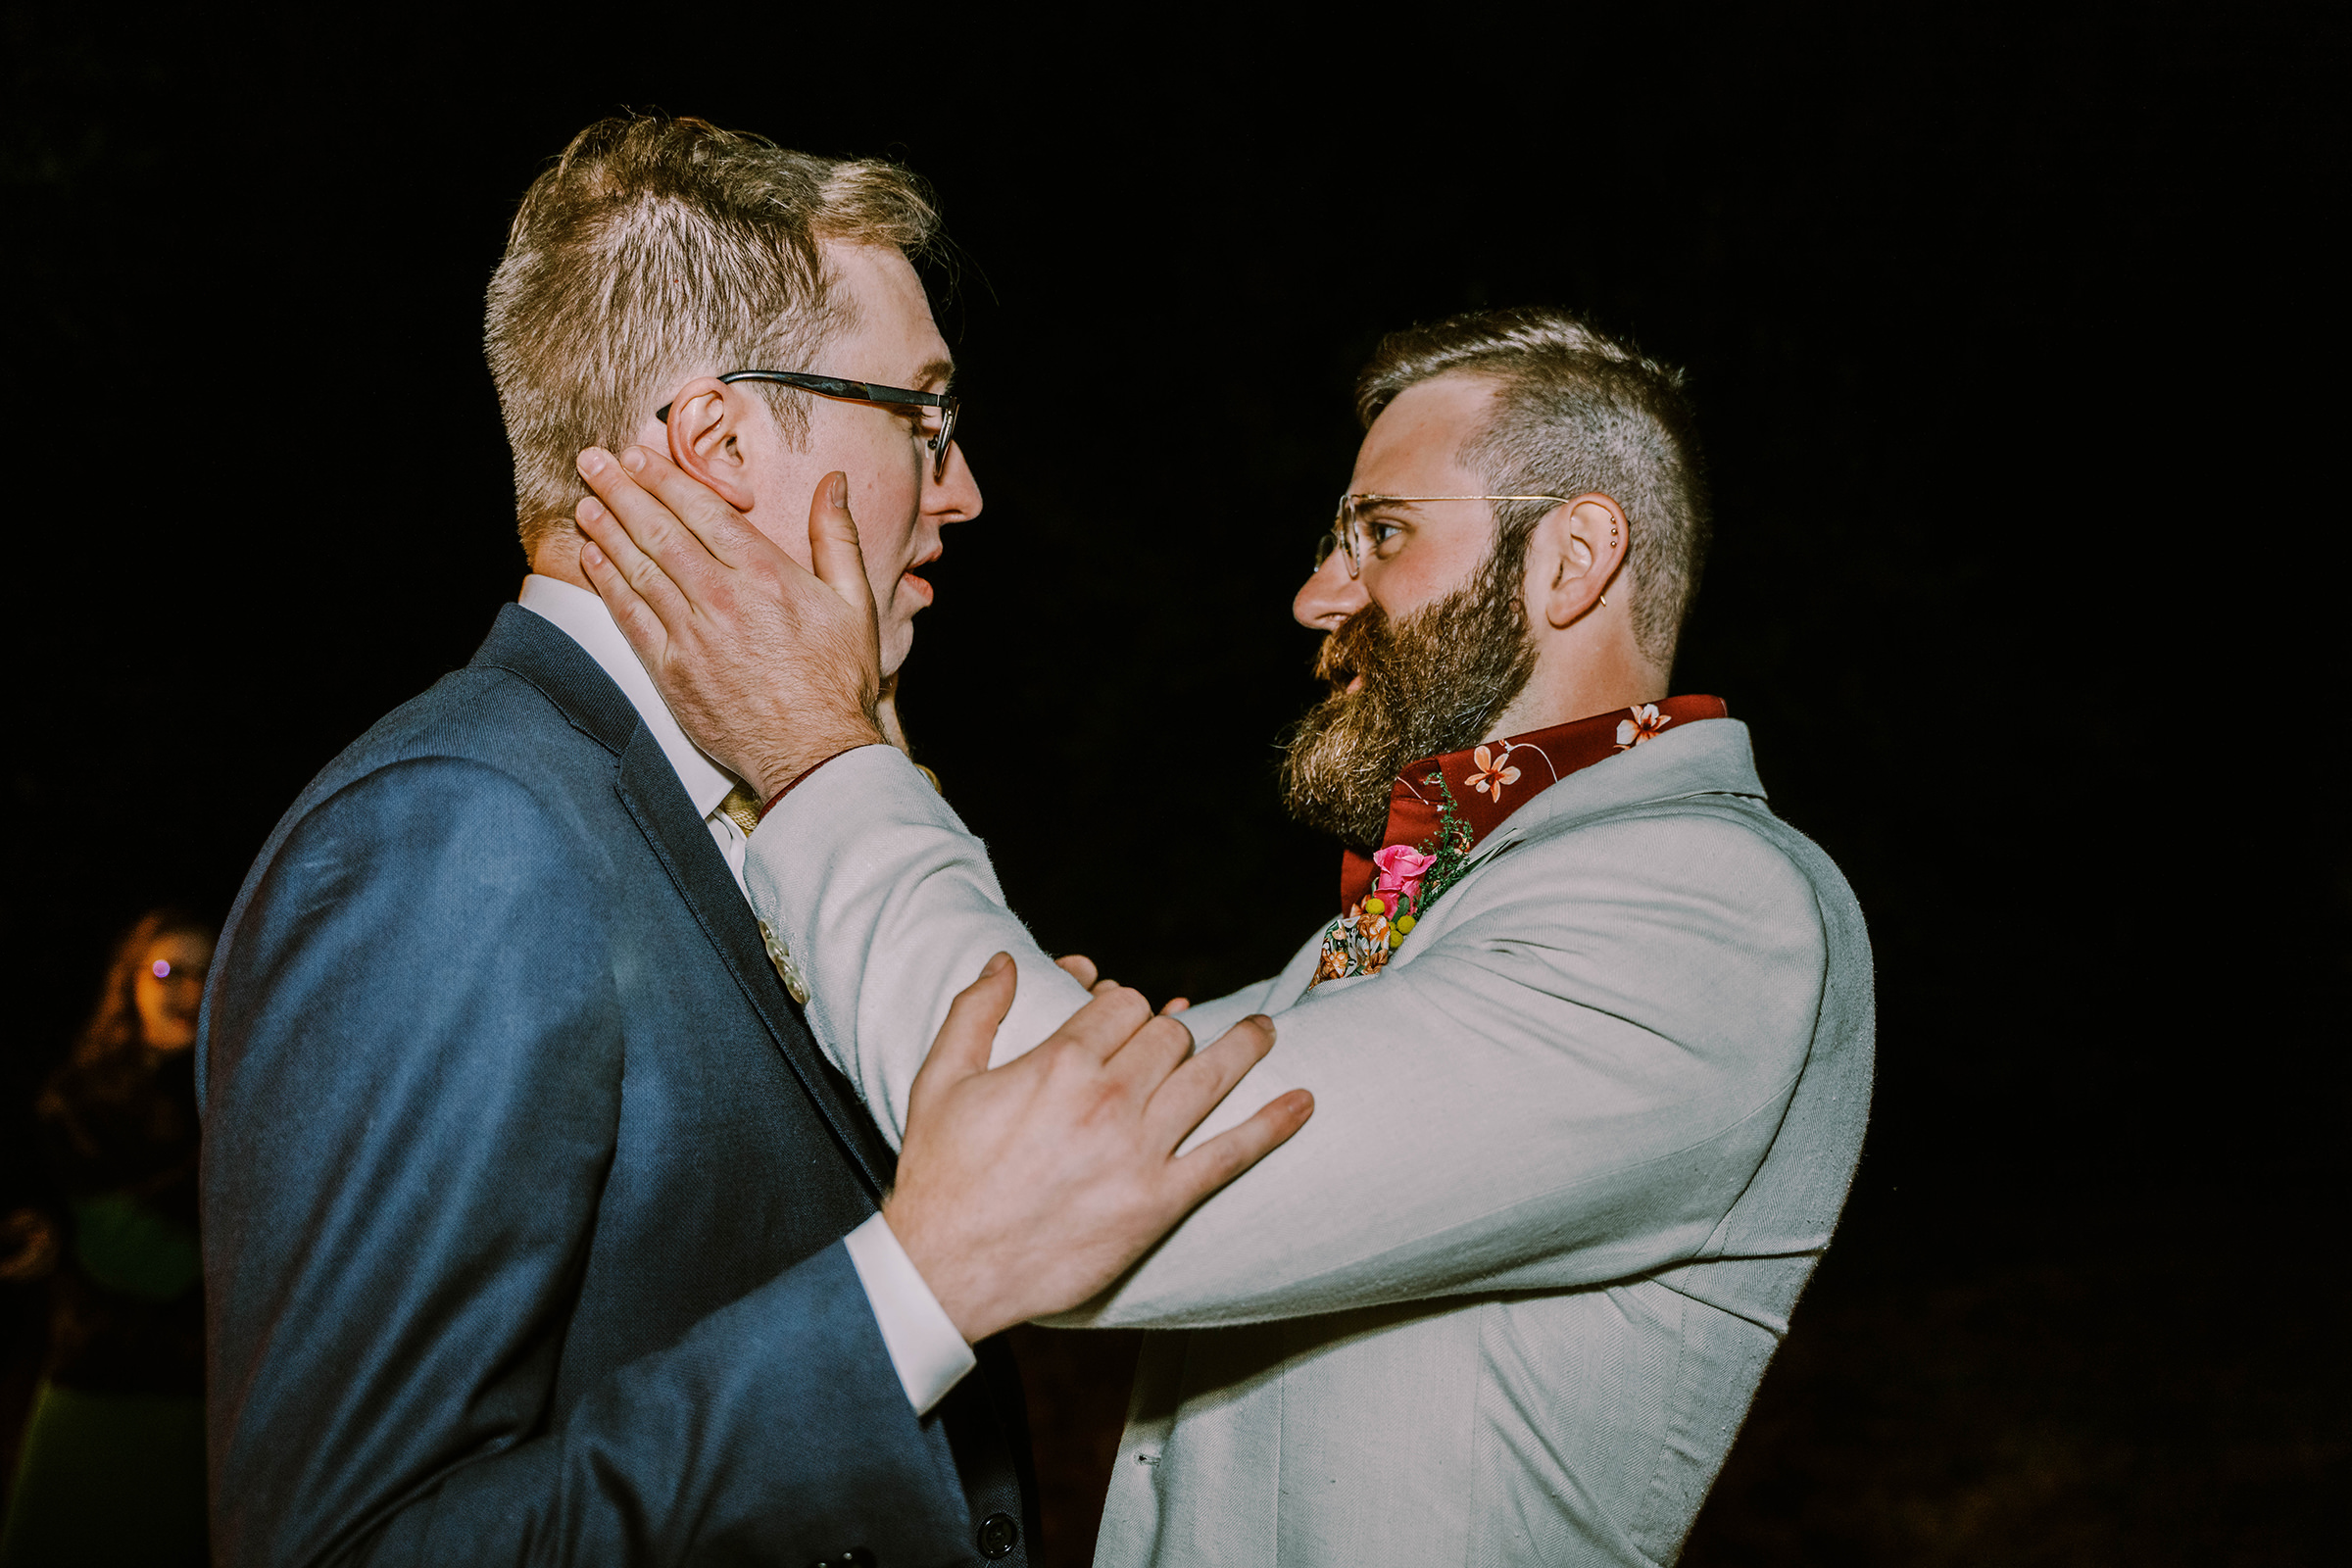 Sean and his best man share a moment.